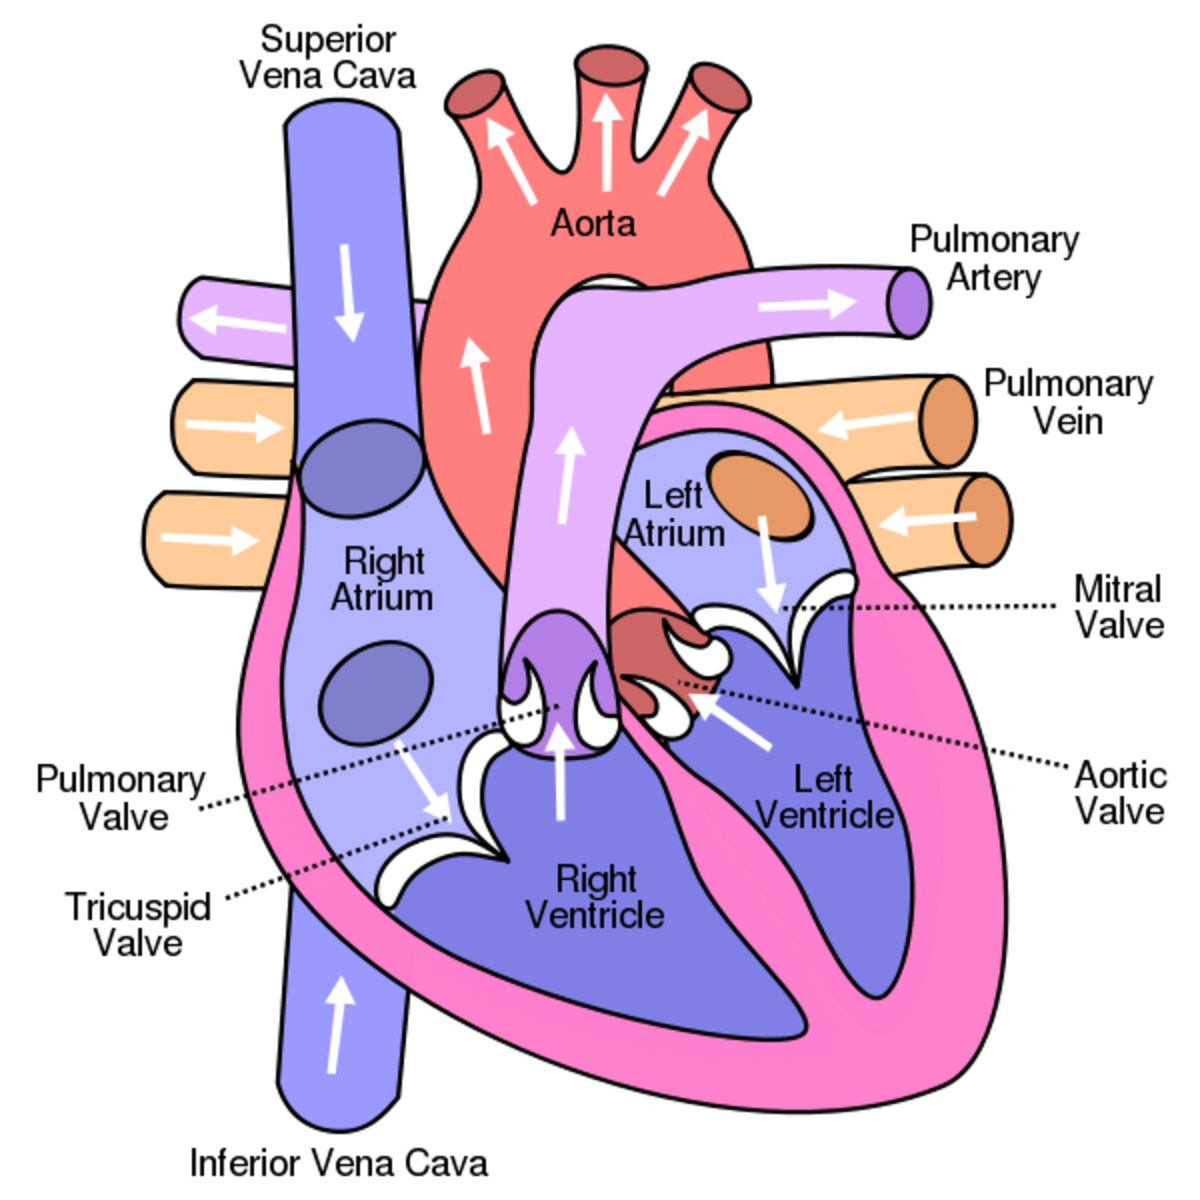 Diagram of human heart. The circulatory system. Image credit: Eric Pierce via Wikimedia Commons. This is a view from the front - means the right side of the heart is on the left of the diagram (and vice-versa)